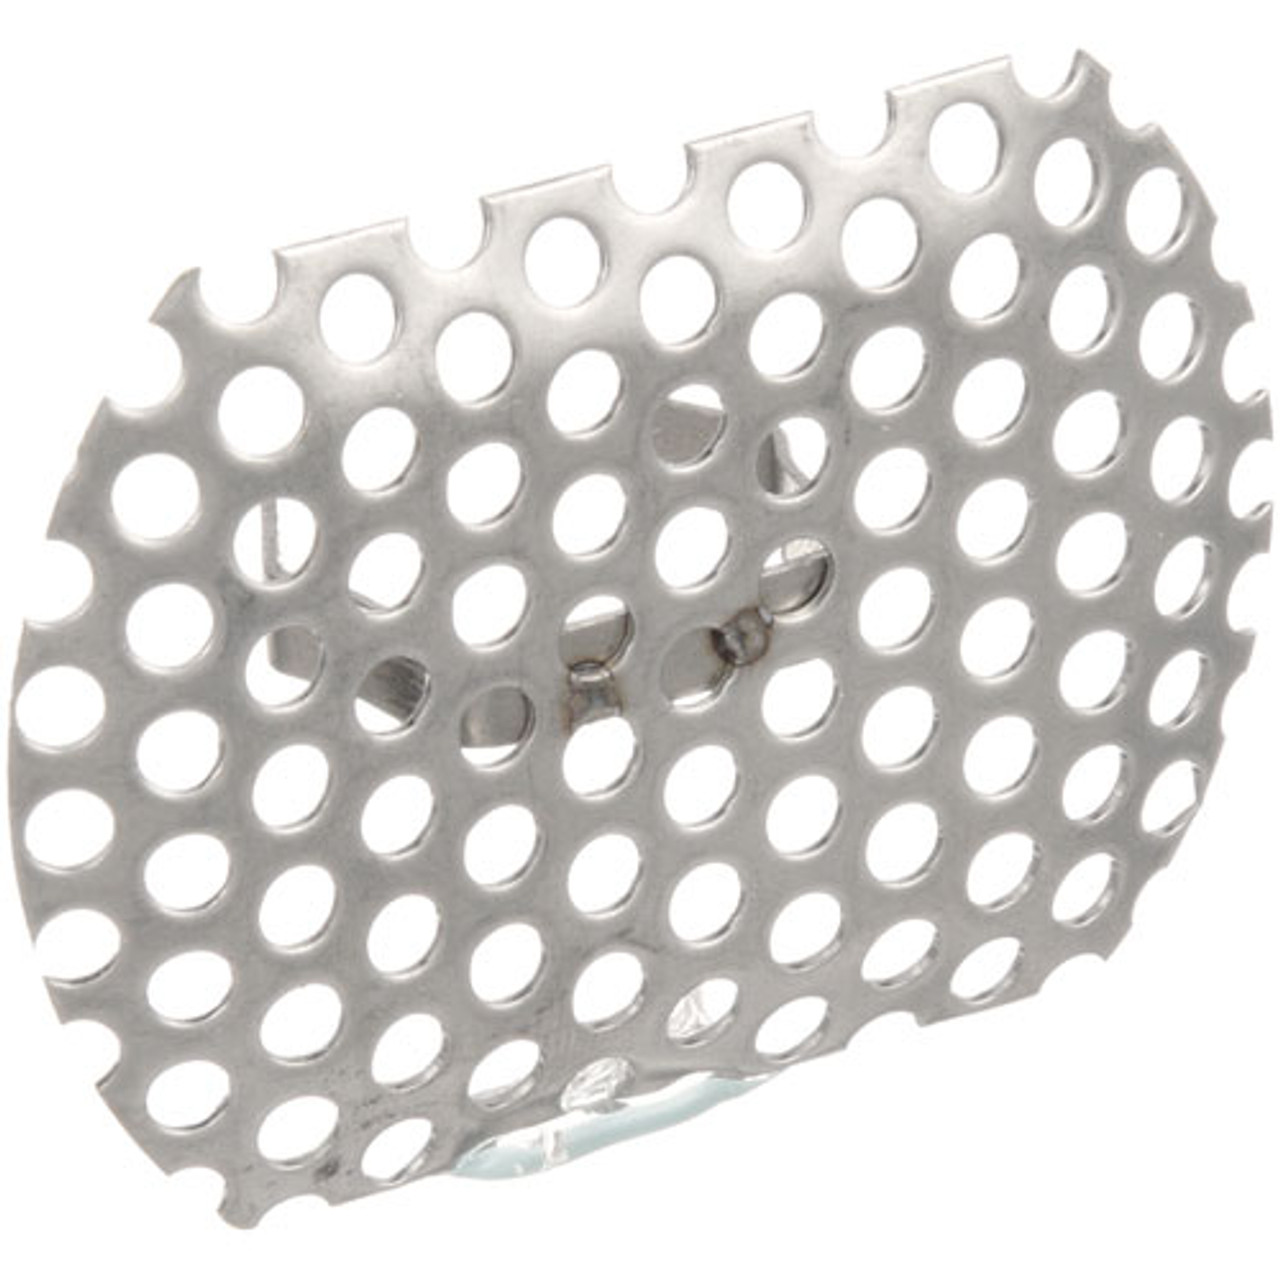 Drain Screen - Replacement Part For Star Mfg 5P21709